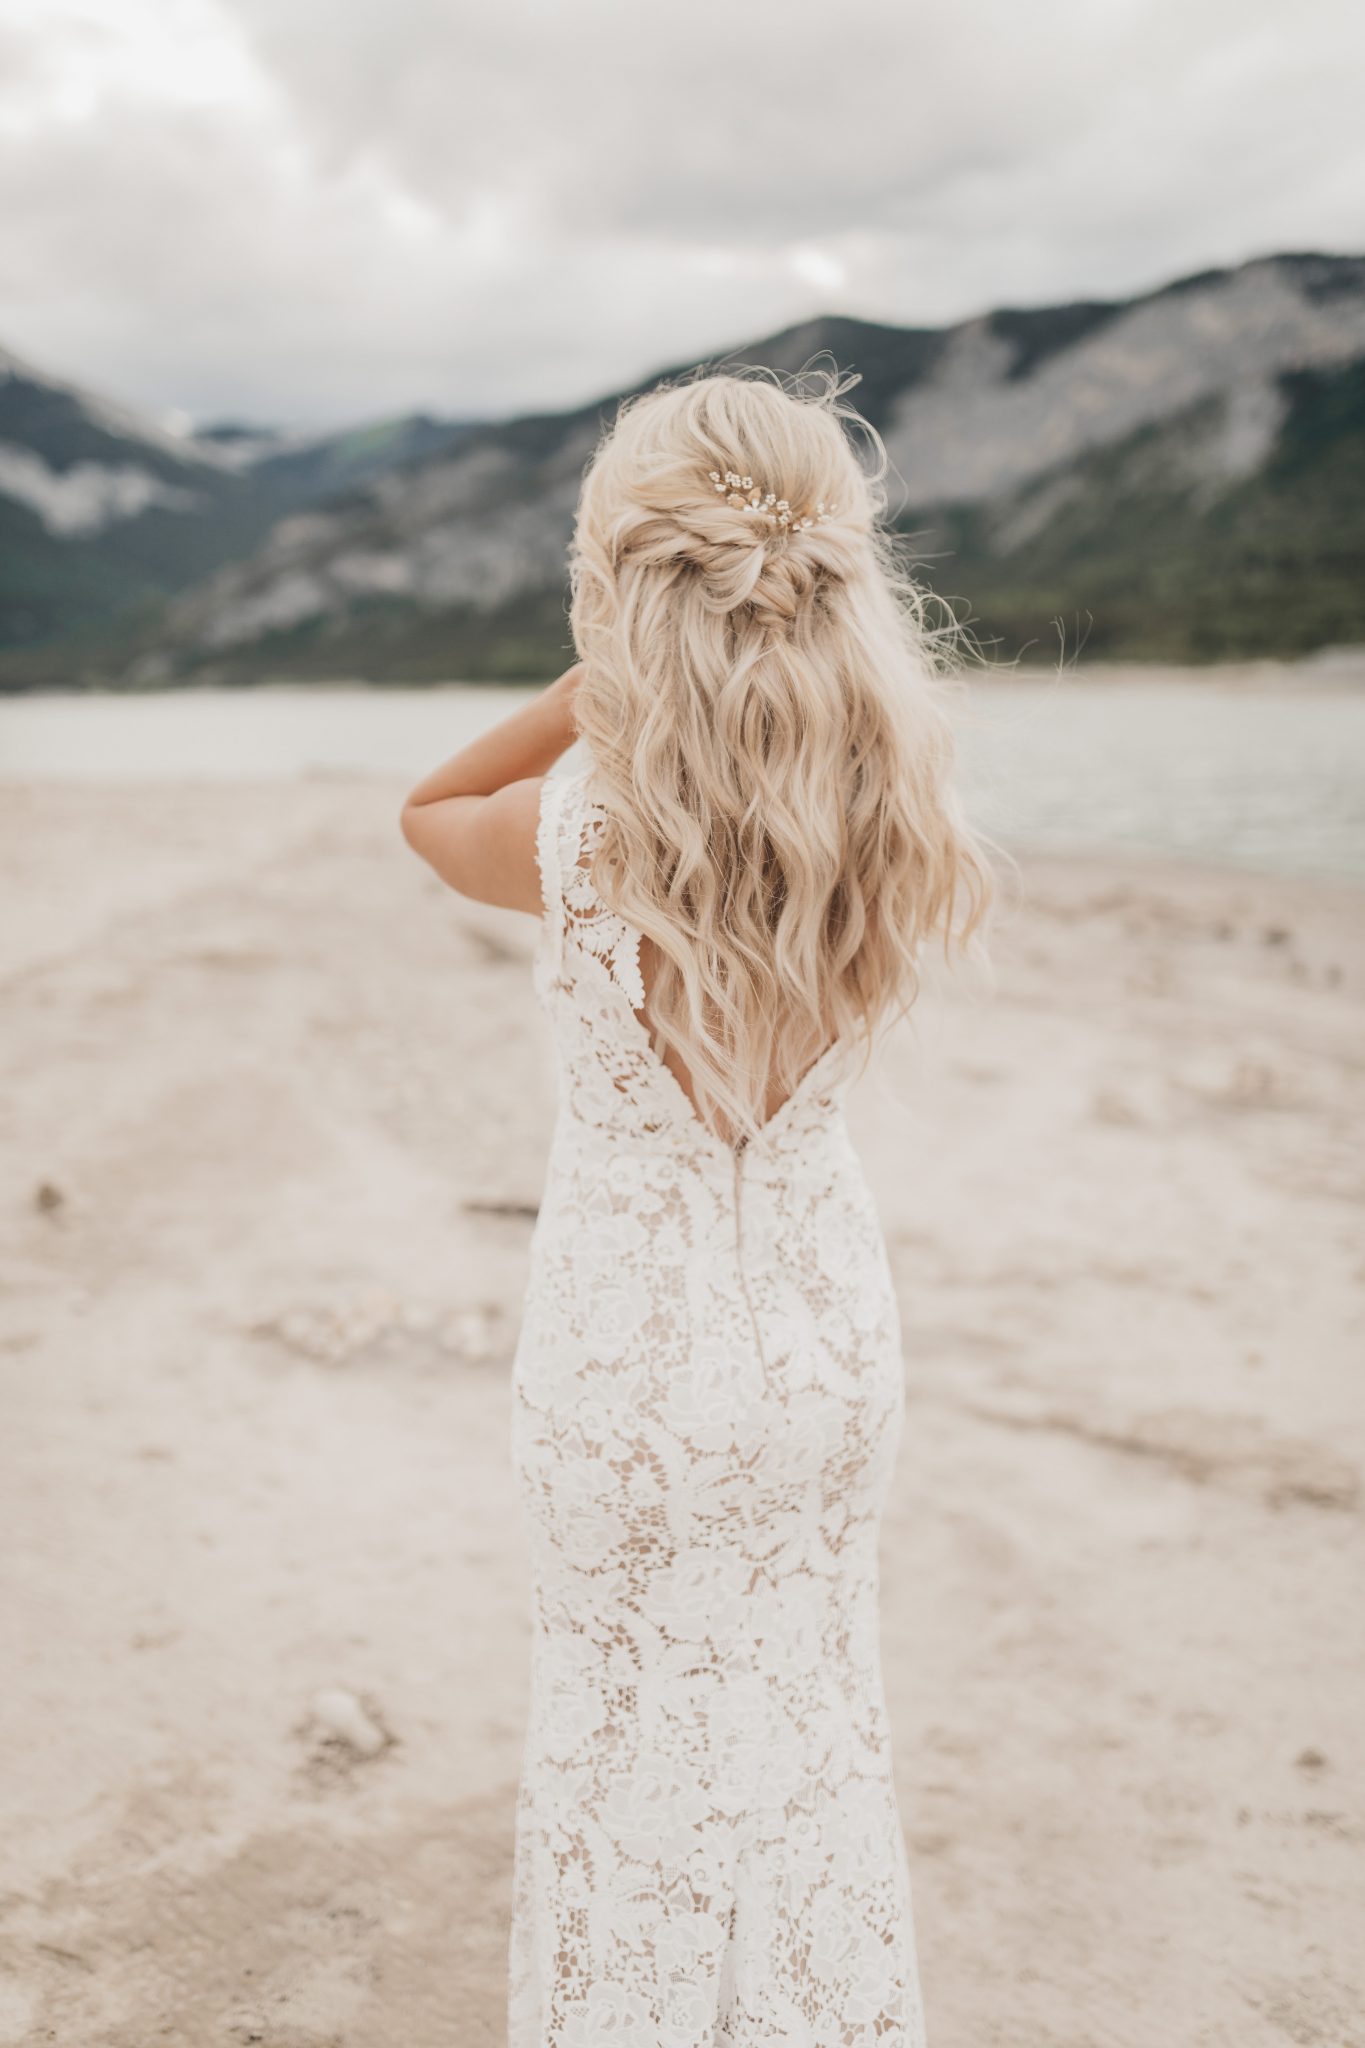 Bohemian Barrier Lake Elopement With Dried Palms & Understated Earth Tones - Elopement on Bronte Bride